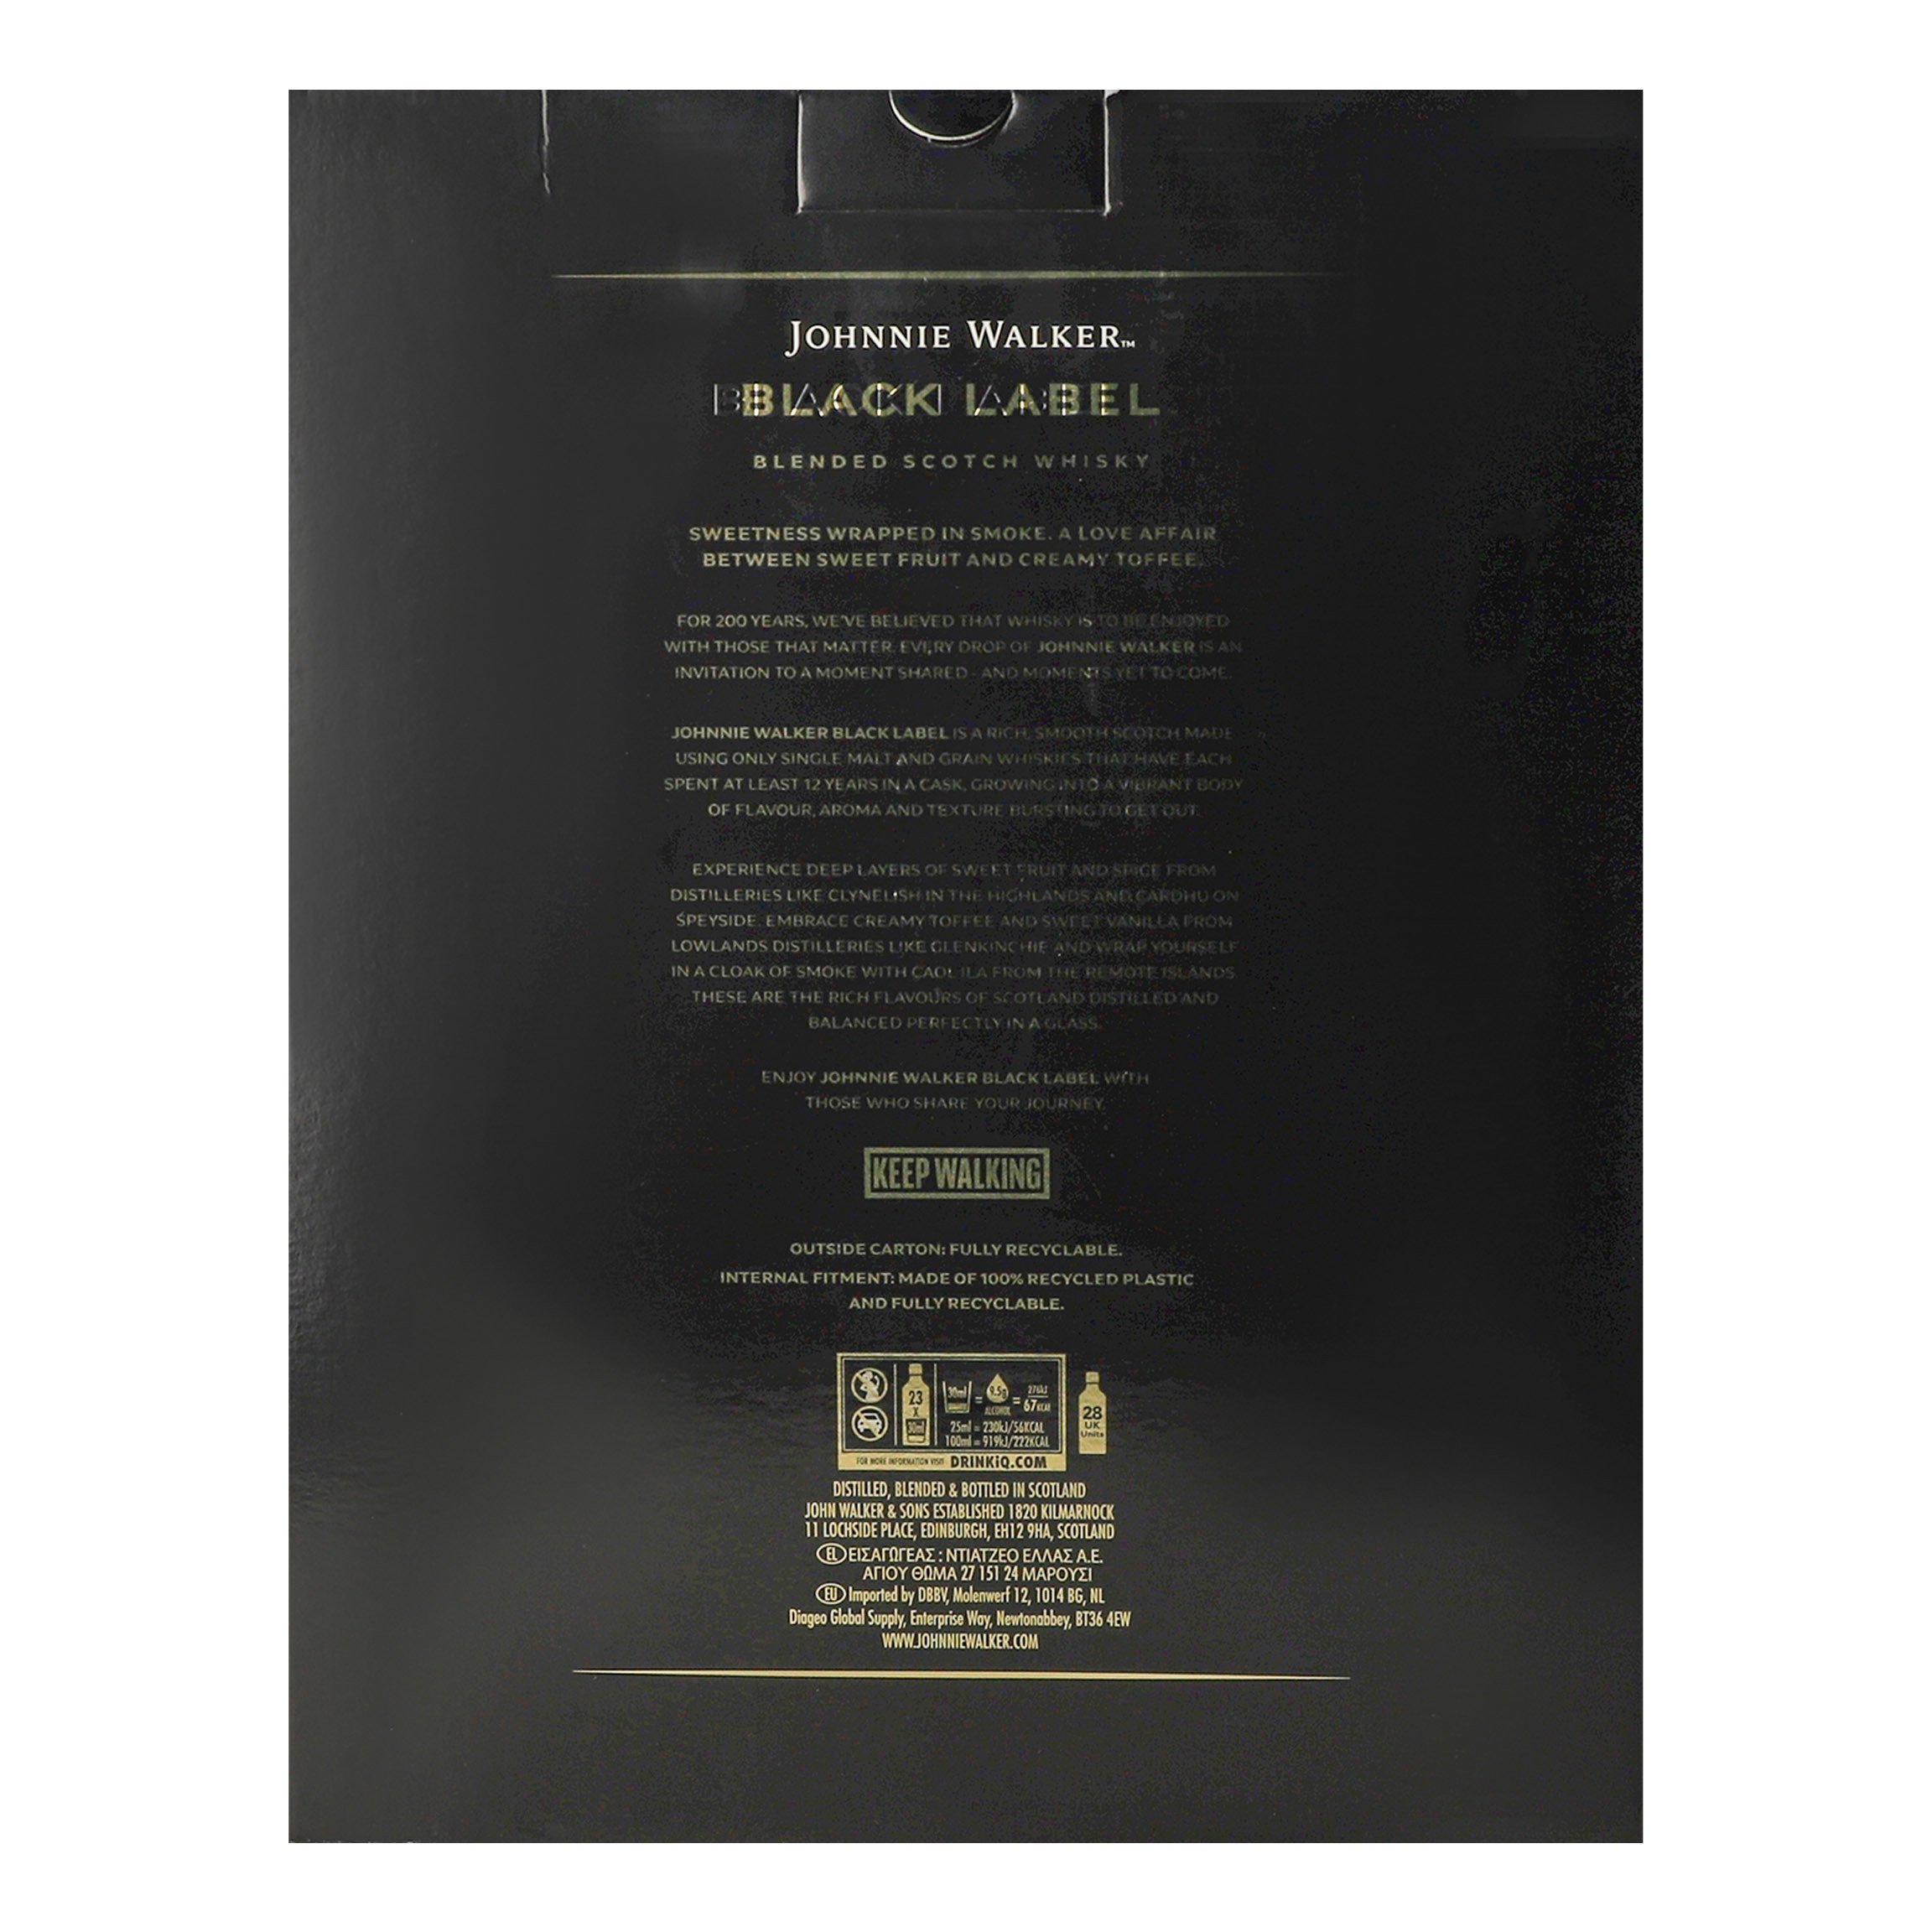 Виски Johnnie Walker Black label Blended Scotch Whisky, 40%, 0,7 л + 2 стакана - фото 4